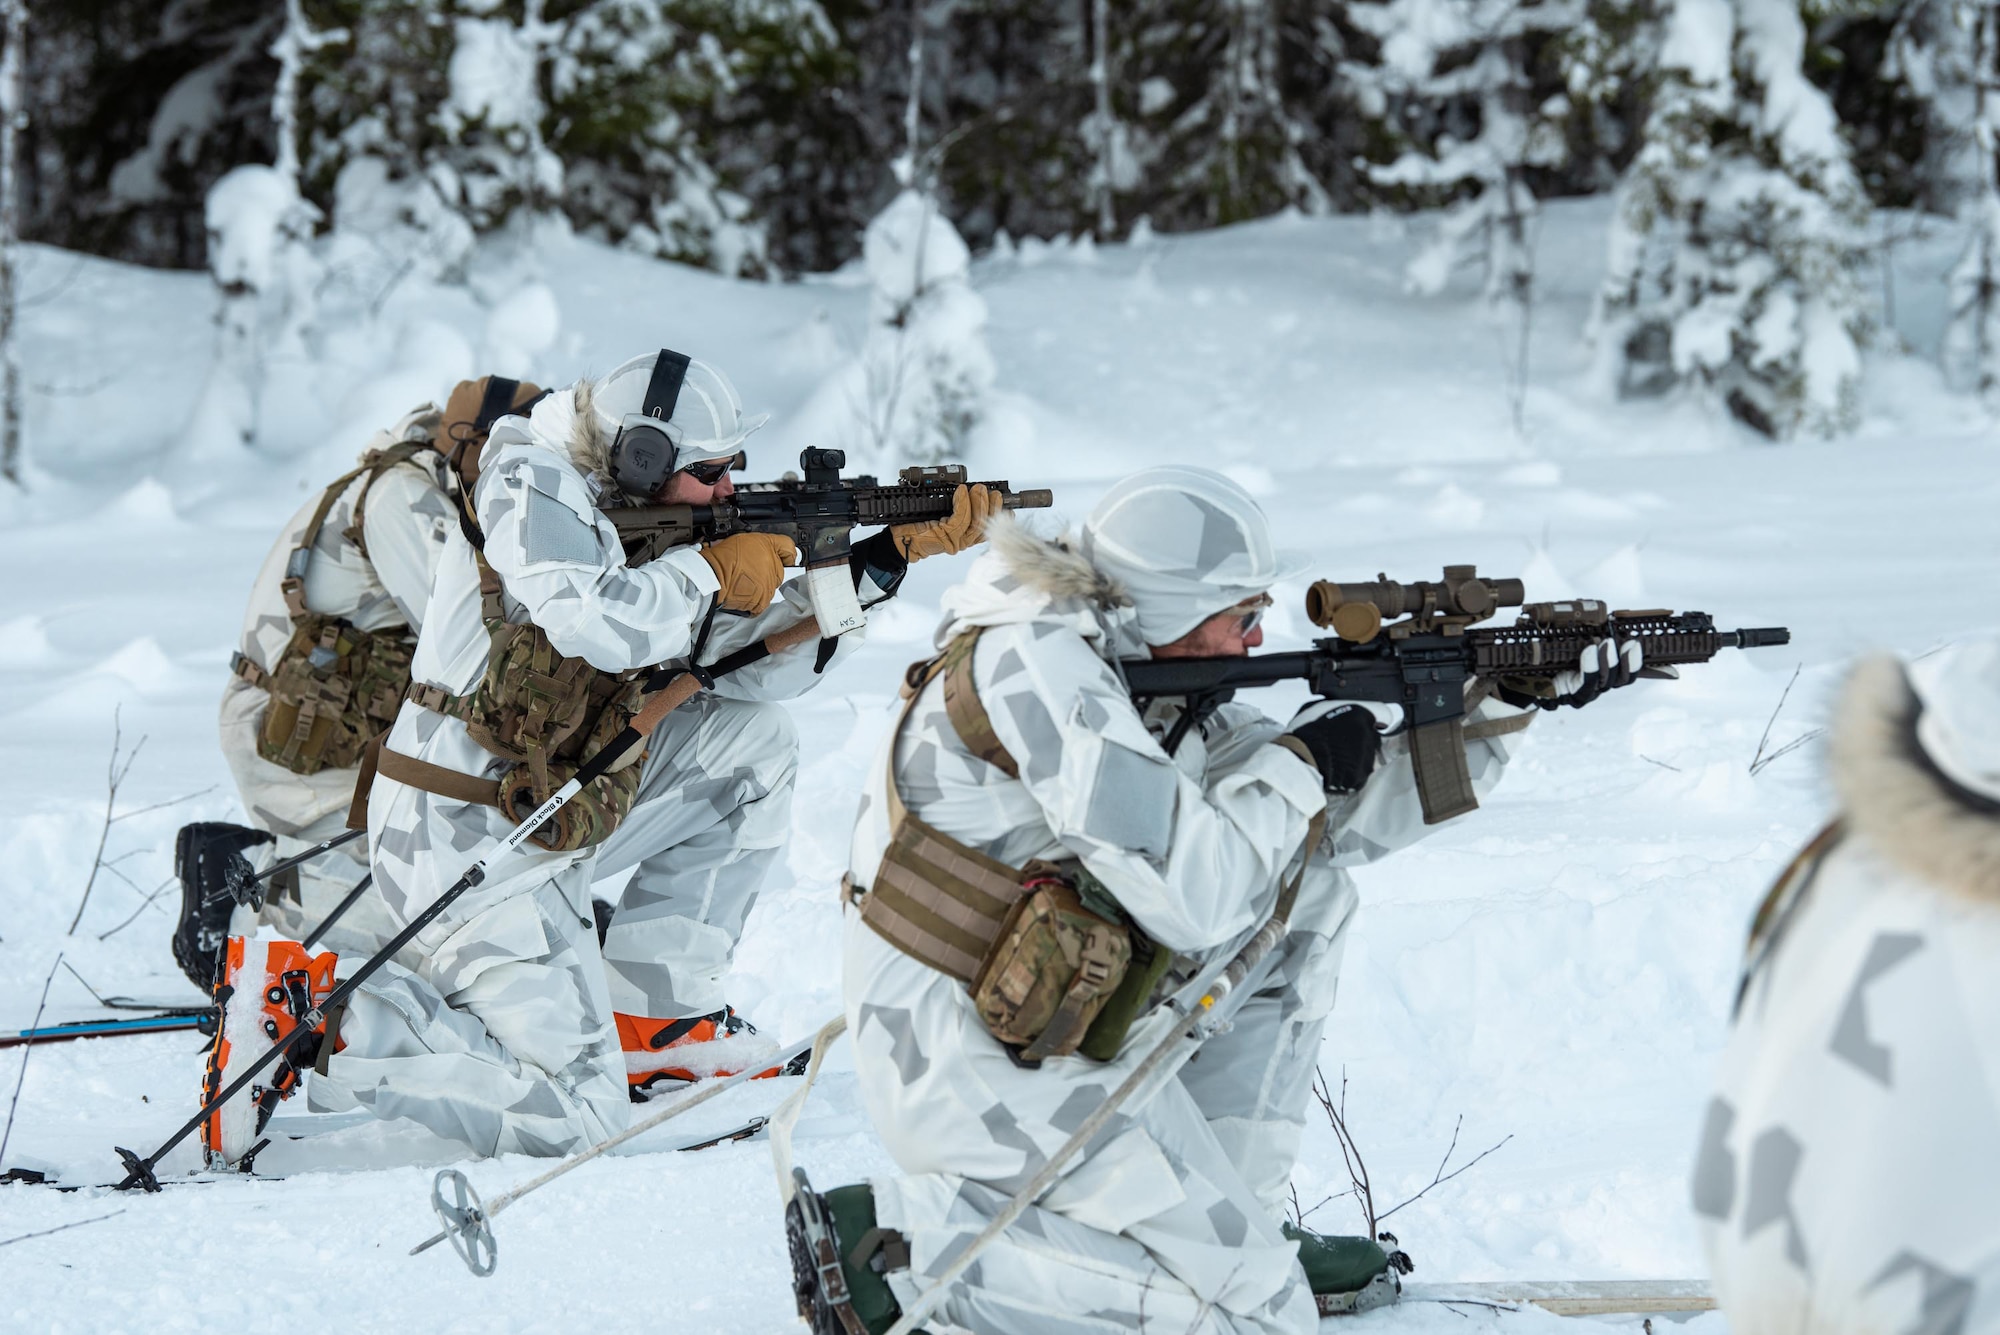 Airmen with the Kentucky Air National Guard’s 123rd Special Tactics Squadron fire their M4 rifles while on skis at a range in Grubbnäsudden, Sweden, Jan. 13, 2022. Fifteen members from the 123rd STS — including combat controllers; pararescuemen; special reconnaissance personnel; search, evasion, resistance and escape troops; and support Airmen — came here to build upon their relationship with European partners during an arctic warfare training course. (U.S. Air National Guard photo by Phil Speck)